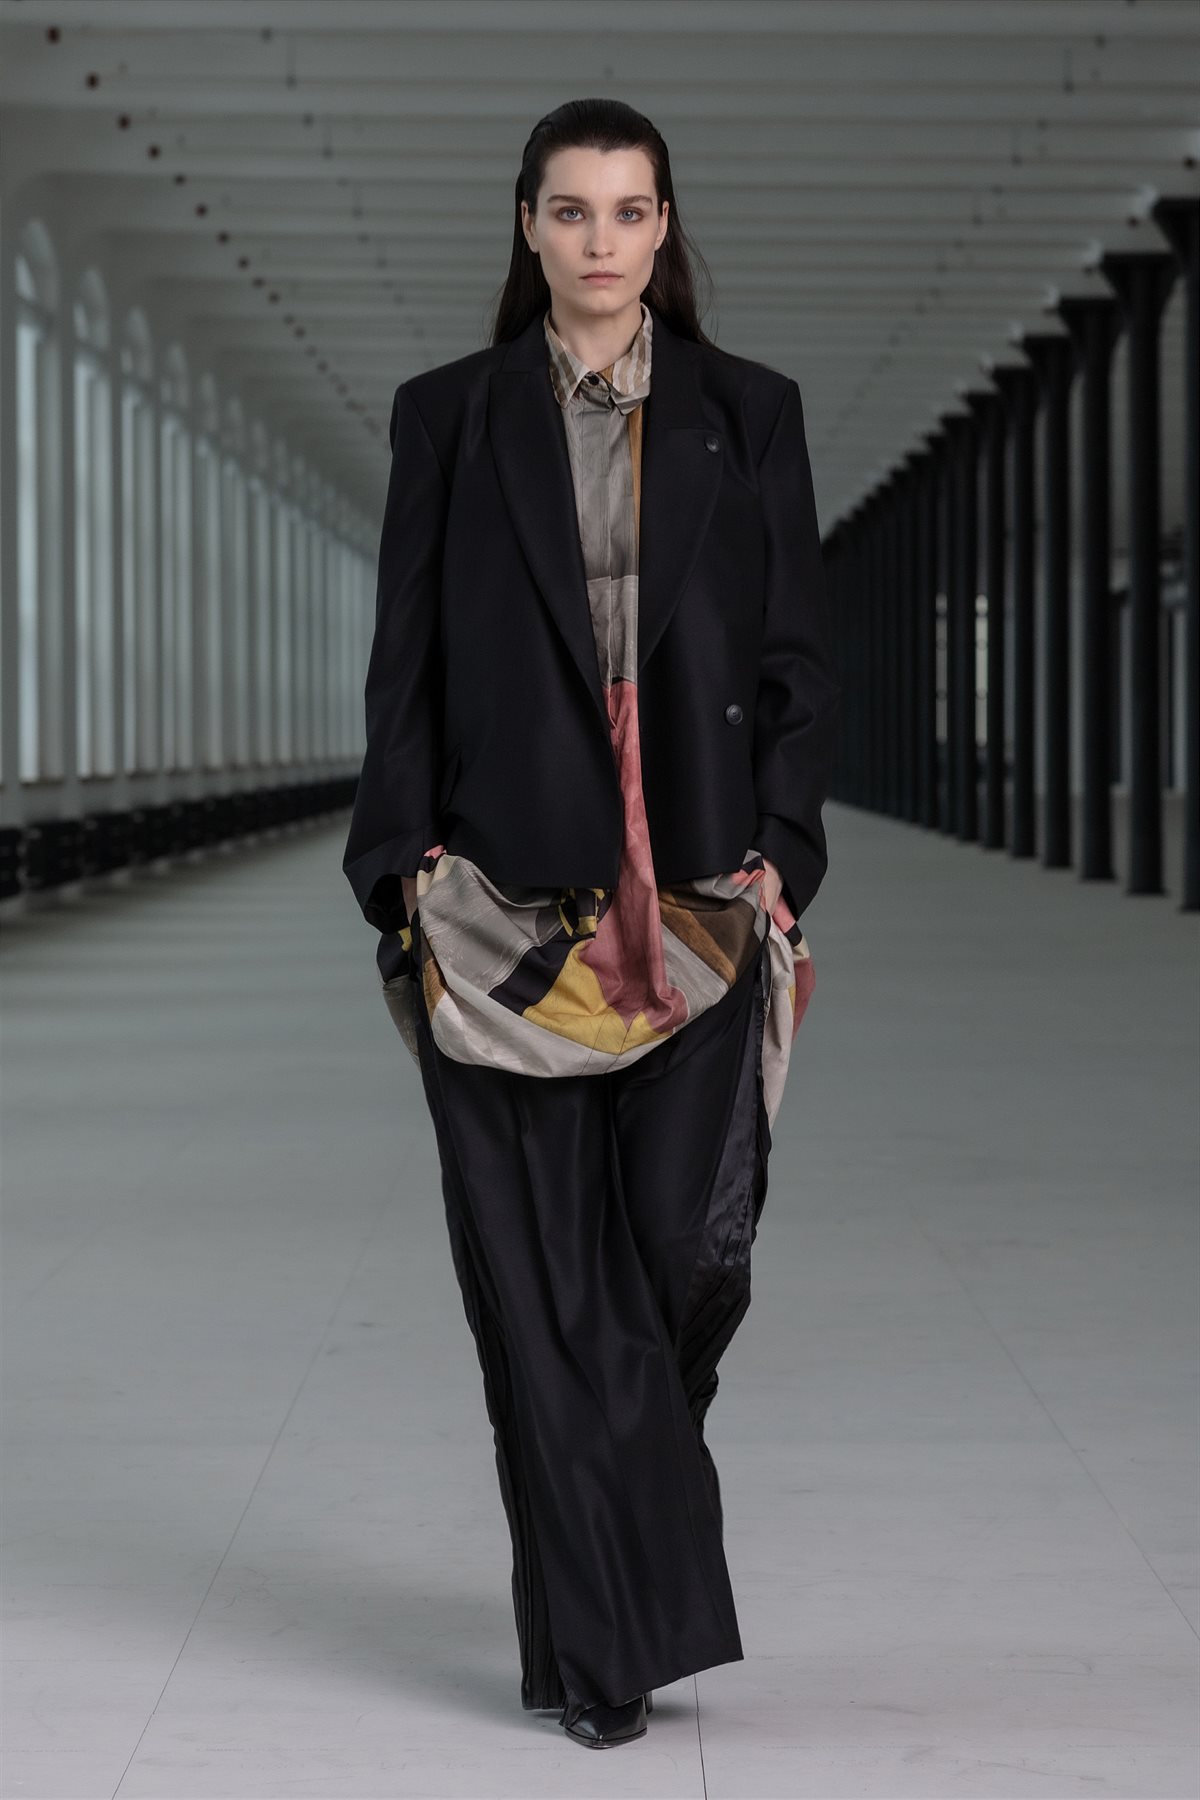 JERRY black jacket with contrasting back DAILIN multicolor print shirt dress with collar detail PRIM black wool wide leg pants with contrasting side